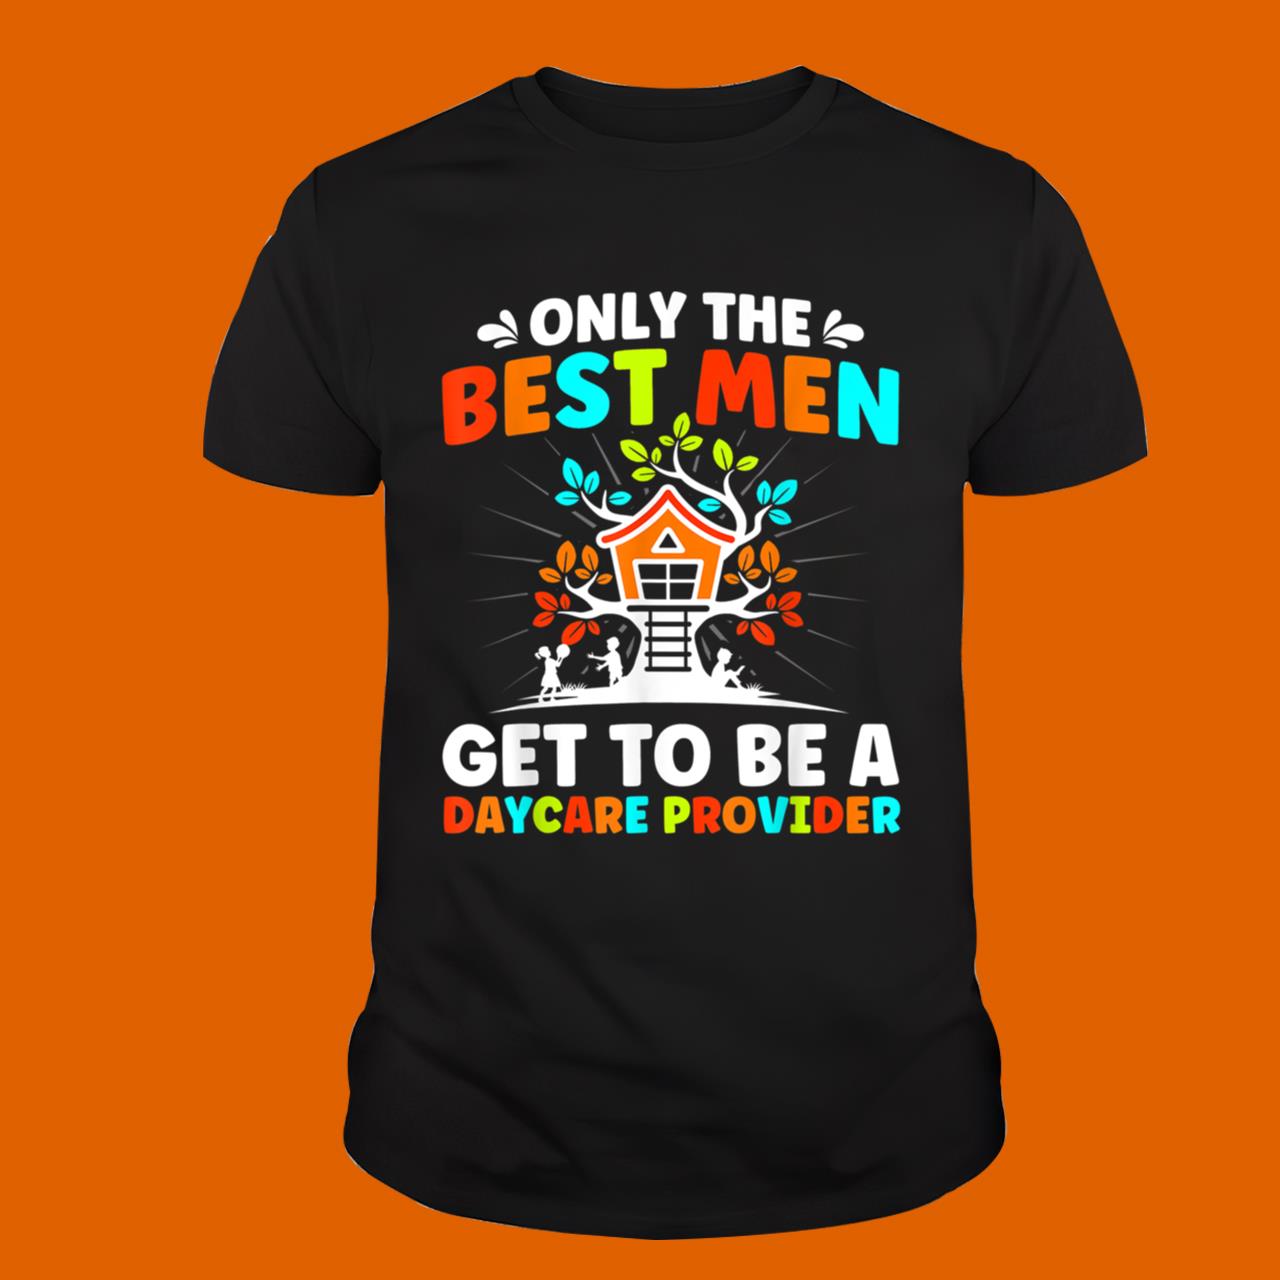 Mens Best Men Get To Be A Daycare Teacher Provider Childcare T-Shirt